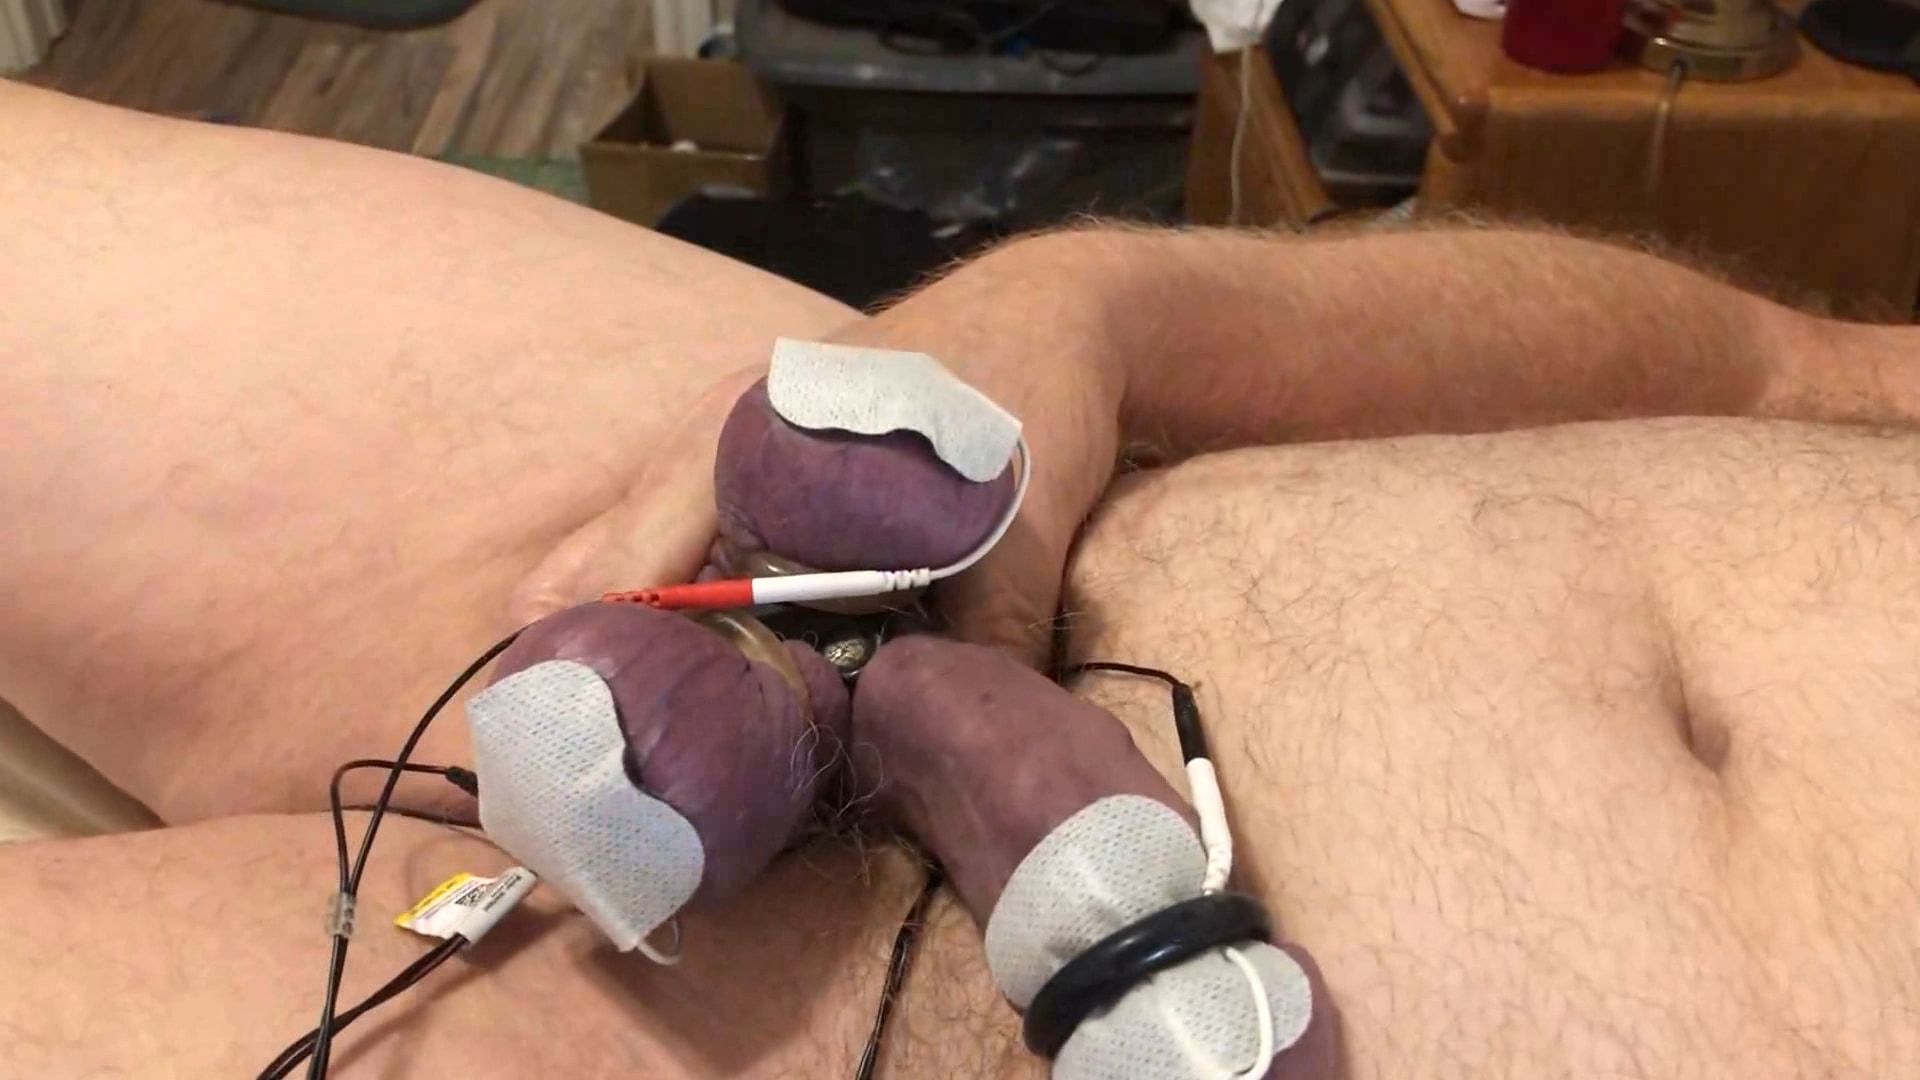 Cock twitches with estim pulse and precum flows as I slap an #51